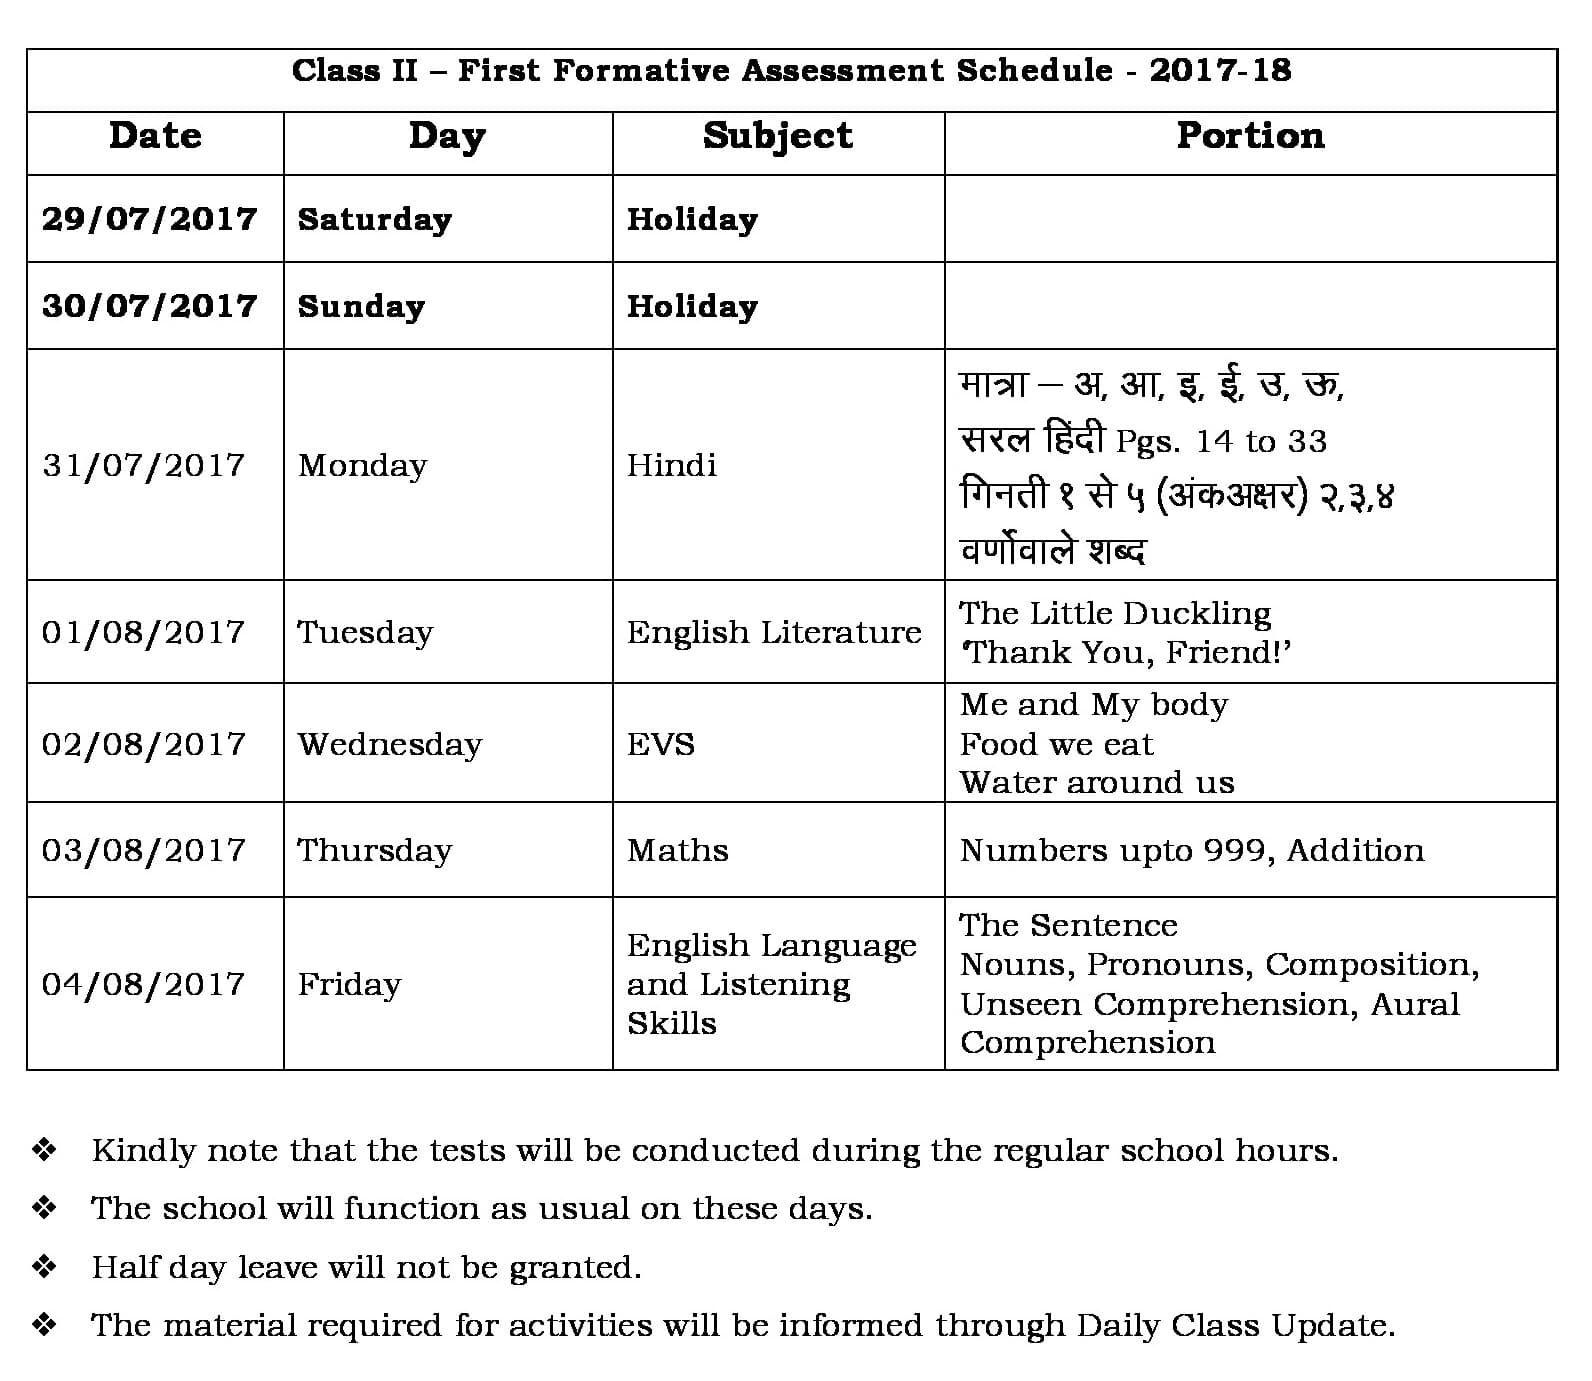 FA1 Portion and Schedule- 2017-18